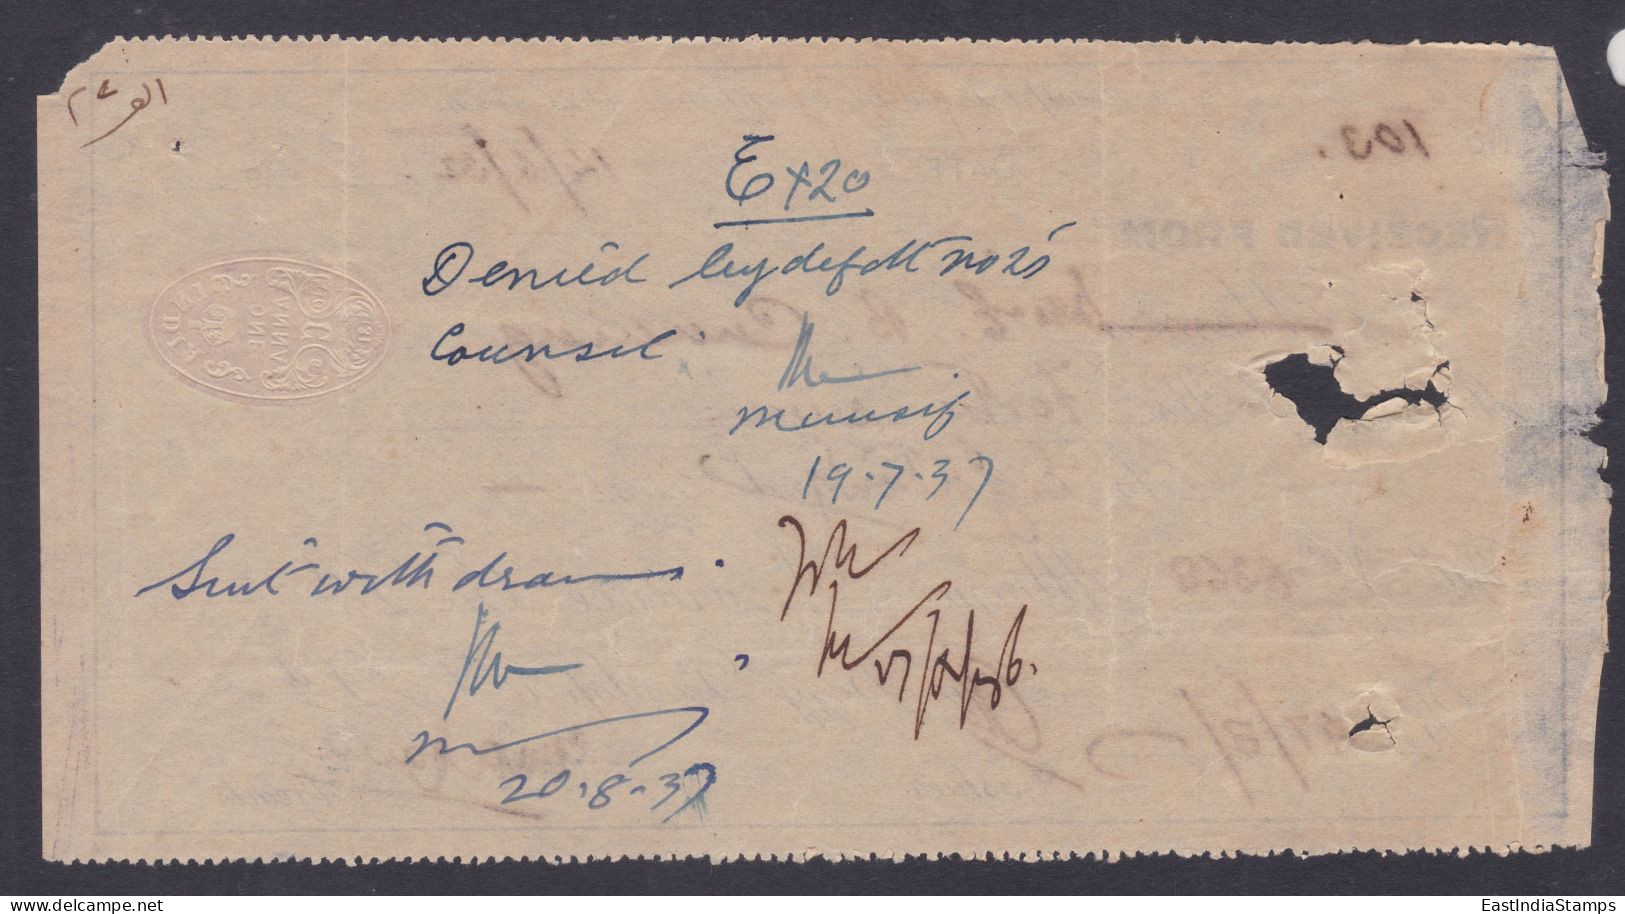 Inde British India 1932 One Anna Receipt, Alliance Assurance Company Limited, Insurance, Begg Dunlop - 1911-35 King George V